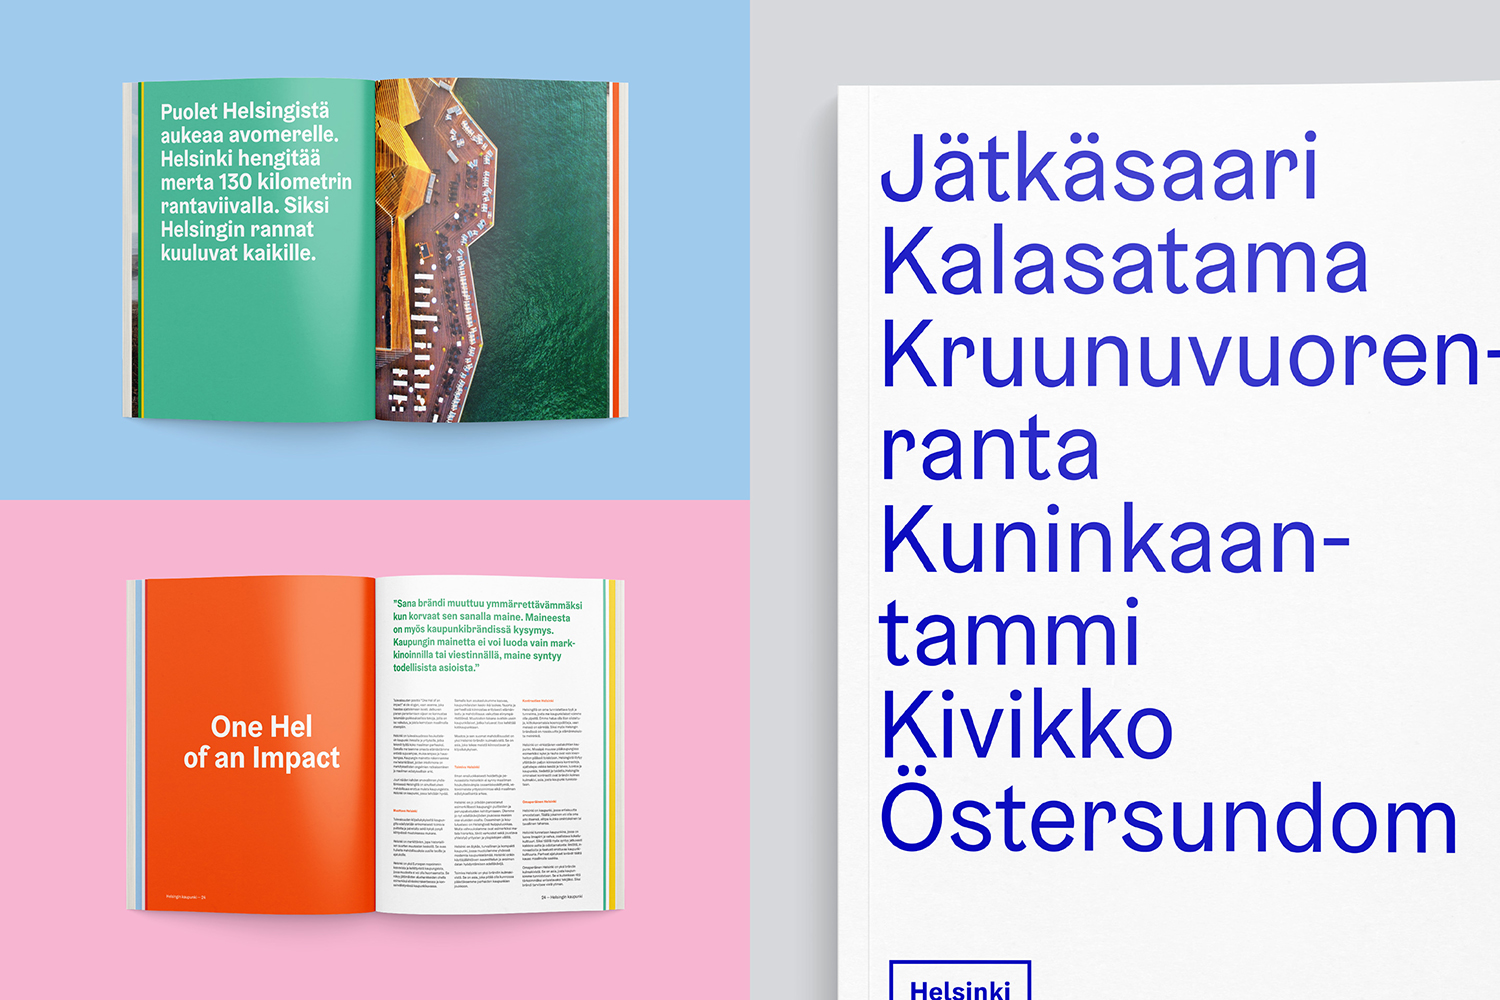 Logo and visual identity system designed by Werklig for the Finnish city of Helsinki